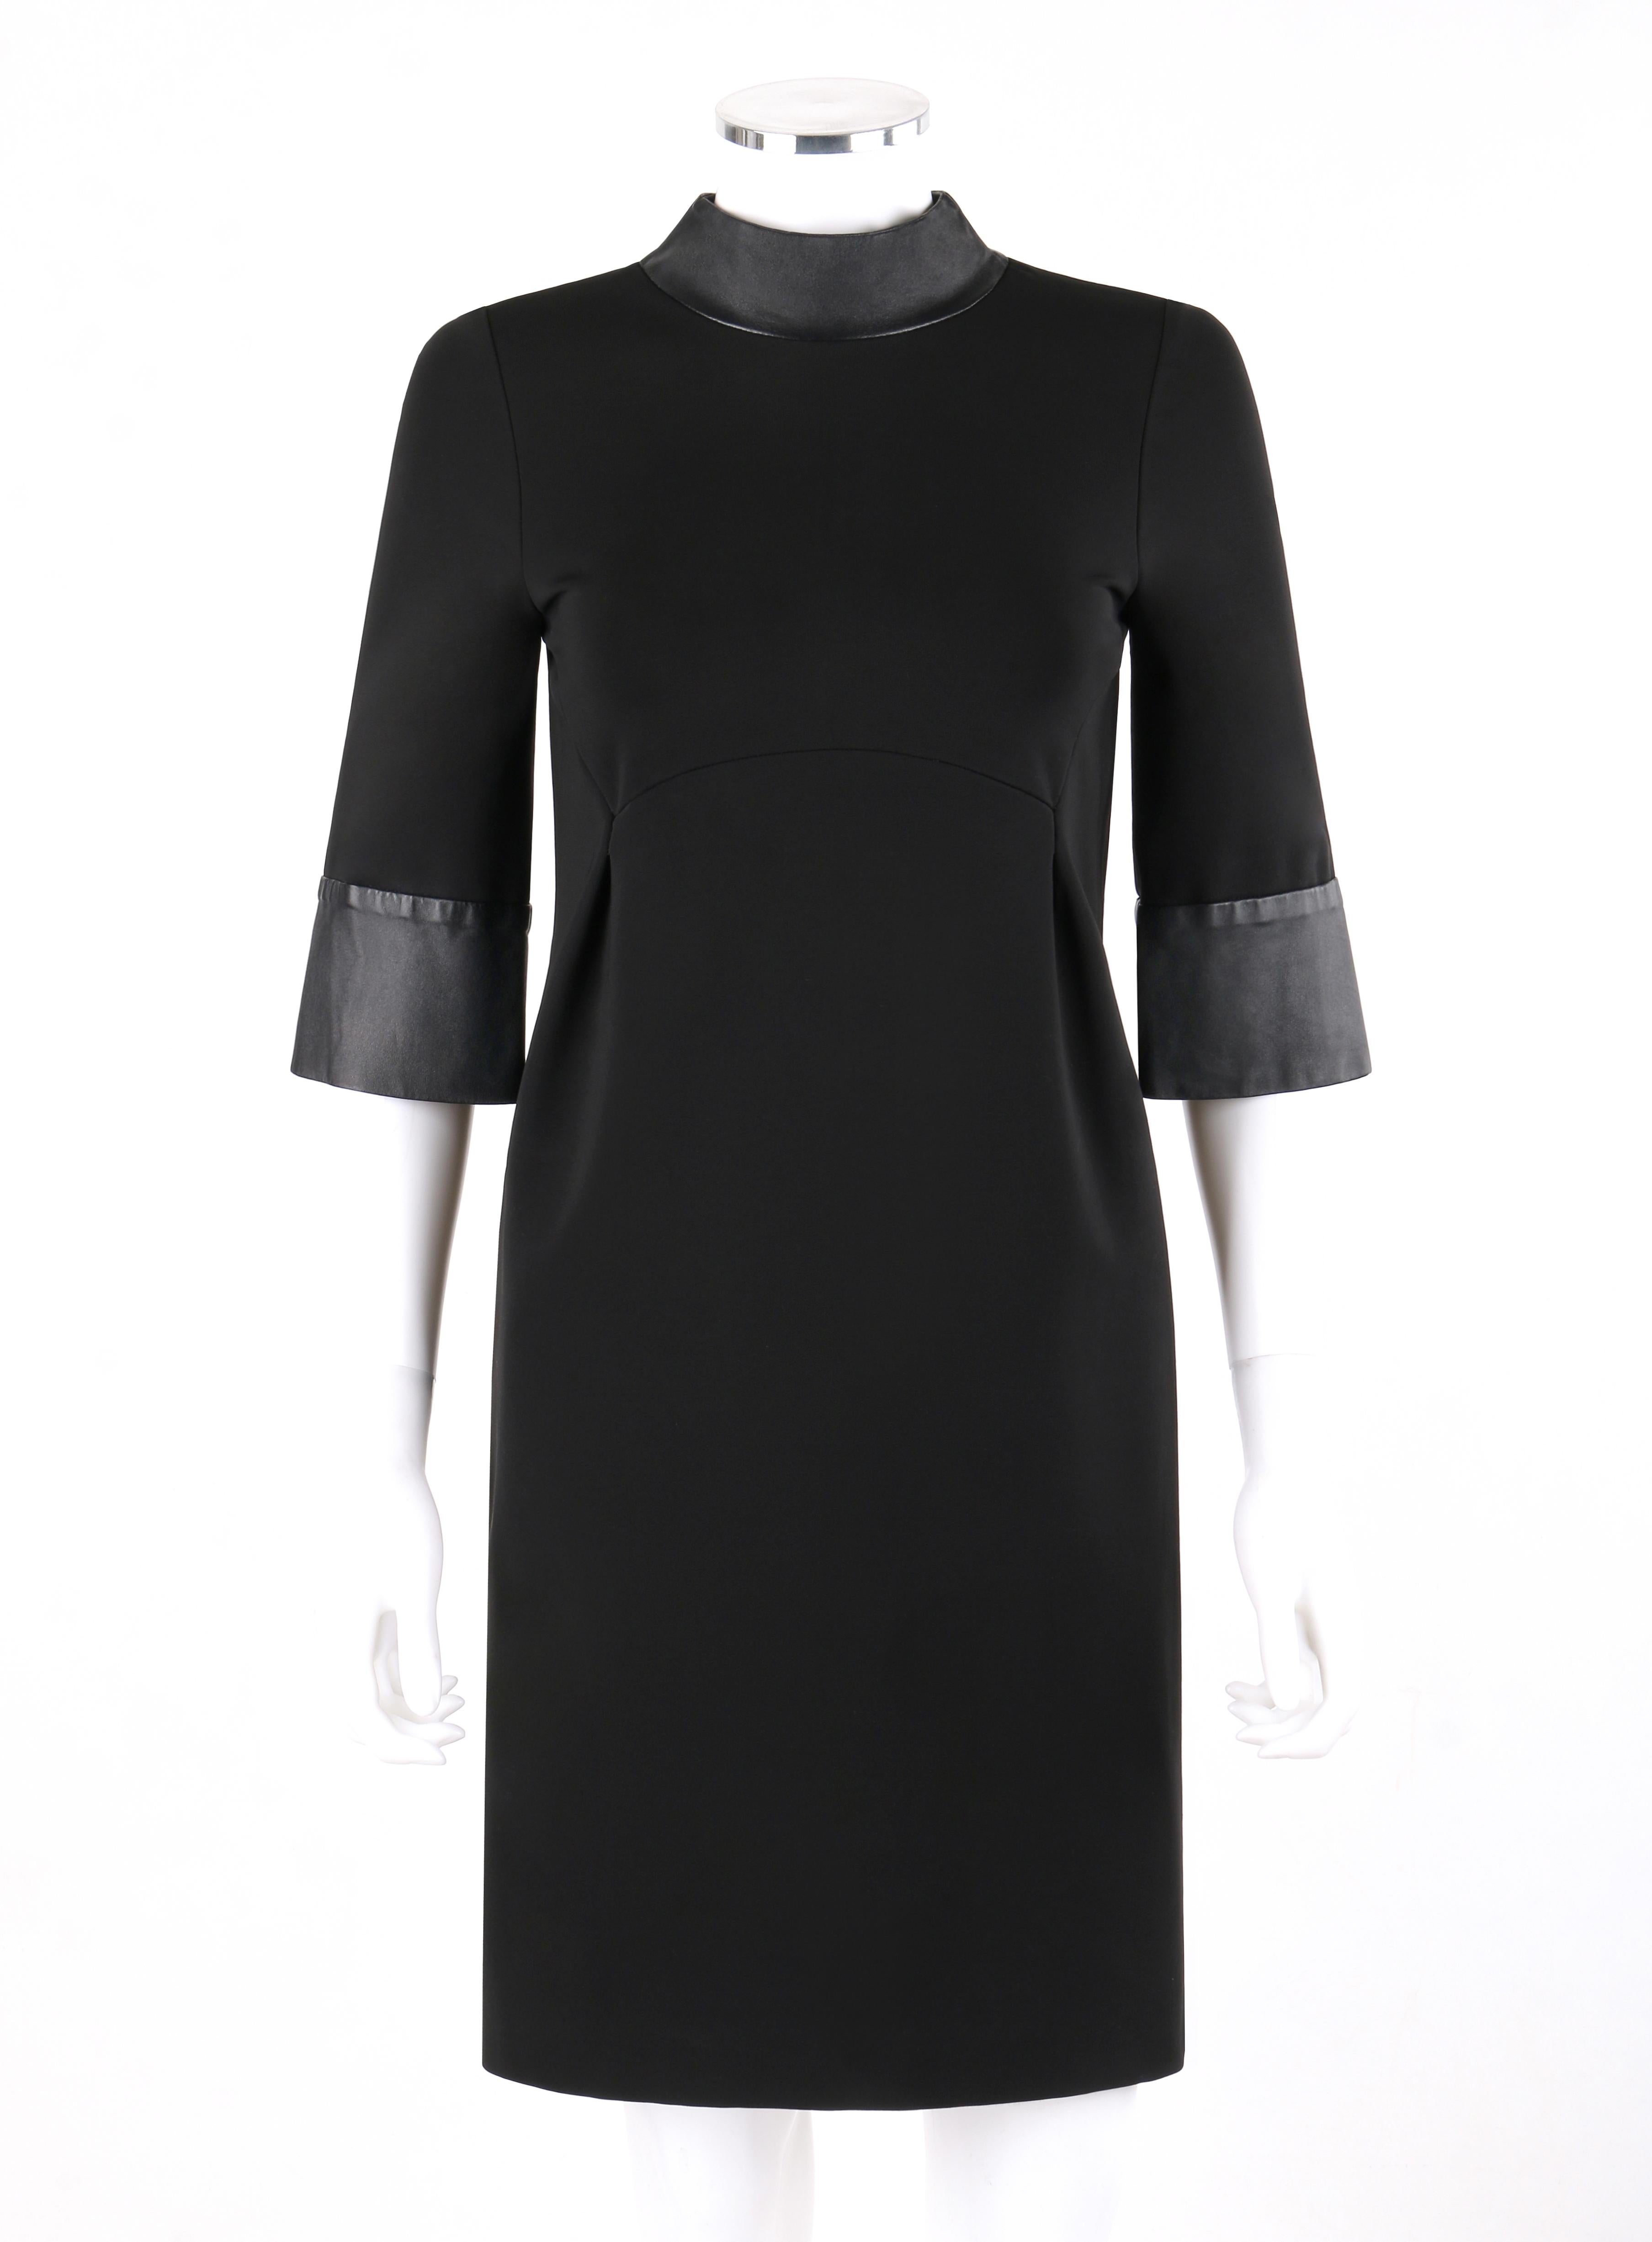 GUCCI Pre-Fall 2014 Black Leather Collar & Cuff Mock Neck Shift Mini Dress - Runway Look #25
  
Brand / Manufacturer: Gucci
Collection: Pre-Fall 2014
Designer: Frida Giannini
Style: Sheath dress
Color(s): Black (exterior, interior)
Lined: Yes
Marked